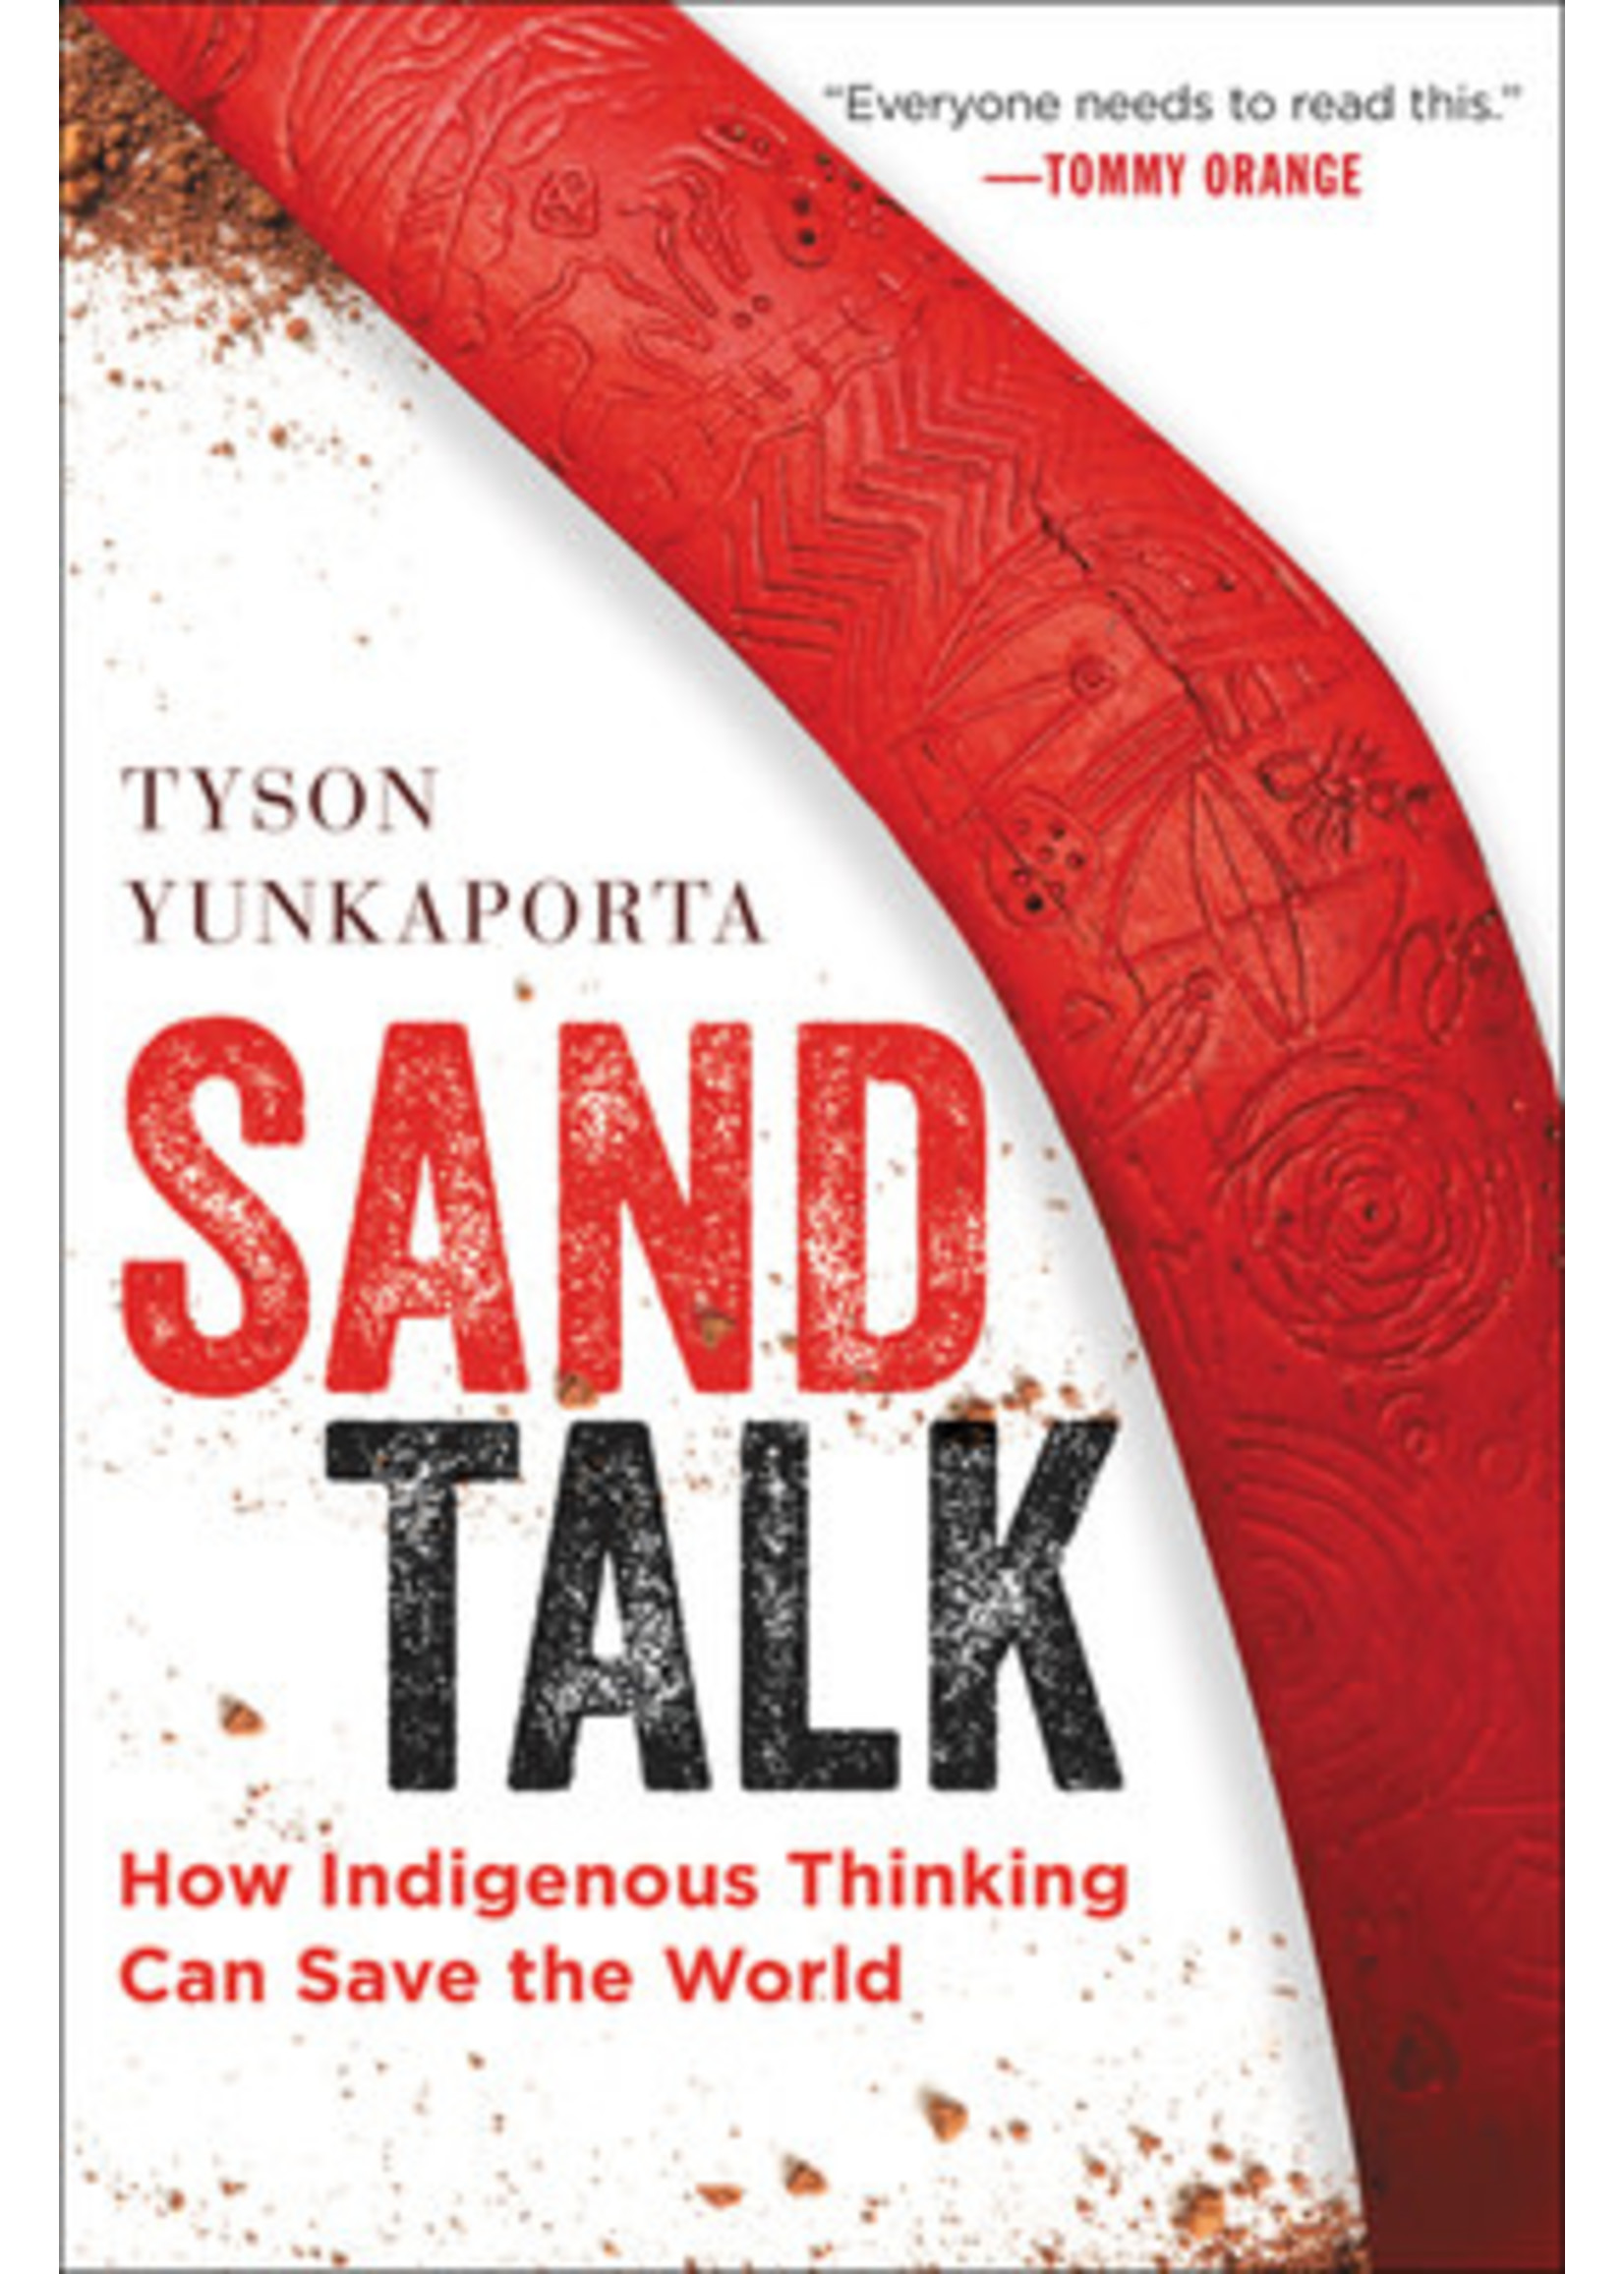 Sand Talk: How Indigenous Thinking Can Save the World by Tyson Yunkaporta